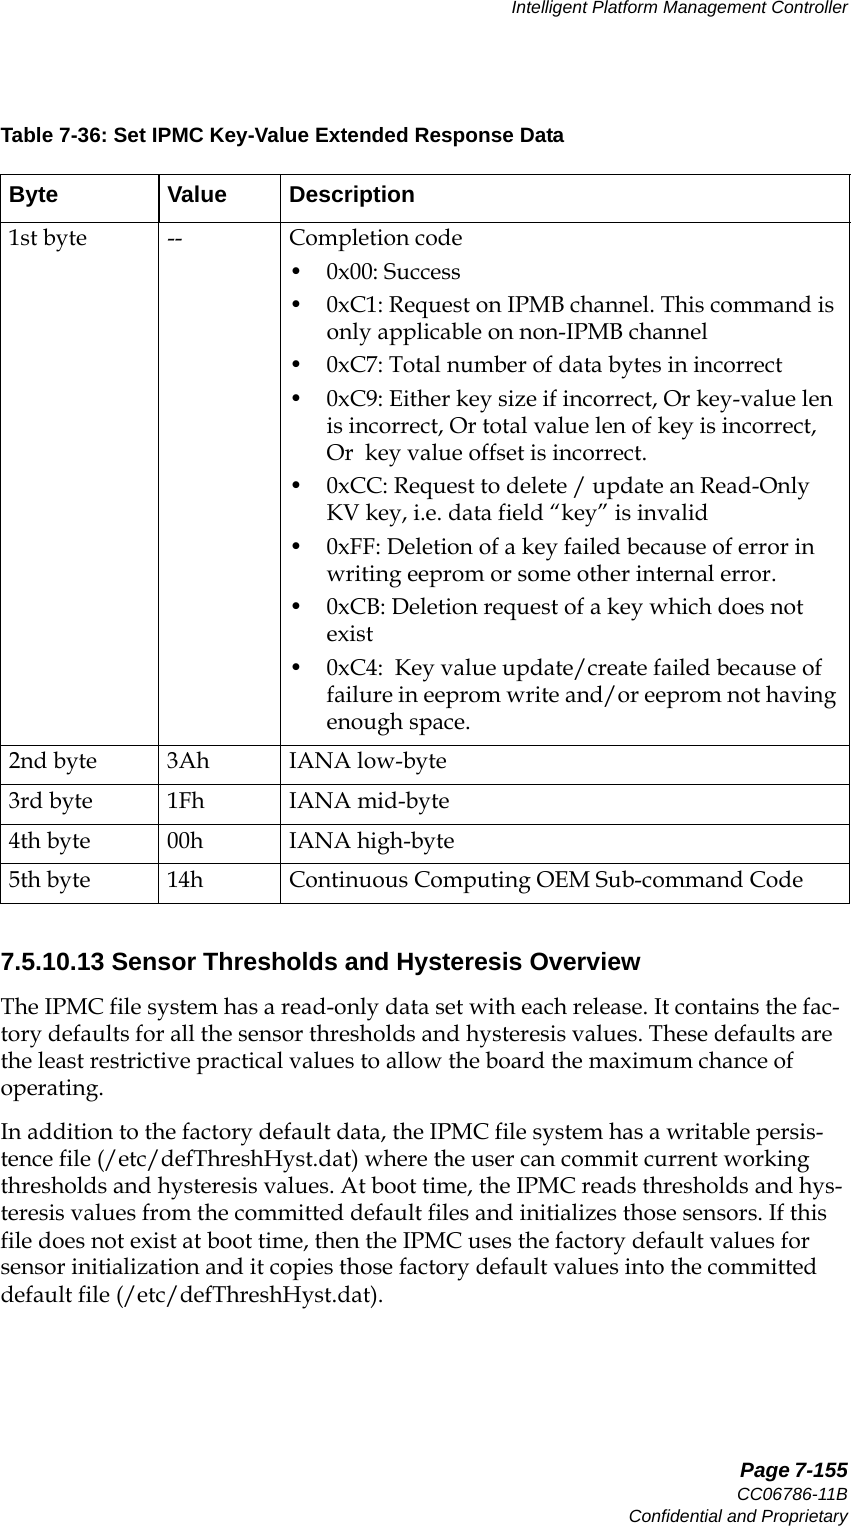   Page 7-155CC06786-11BConfidential and ProprietaryIntelligent Platform Management Controller14ABABPreliminary7.5.10.13 Sensor Thresholds and Hysteresis OverviewThe IPMC file system has a read-only data set with each release. It contains the fac-tory defaults for all the sensor thresholds and hysteresis values. These defaults are the least restrictive practical values to allow the board the maximum chance of operating. In addition to the factory default data, the IPMC file system has a writable persis-tence file (/etc/defThreshHyst.dat) where the user can commit current working thresholds and hysteresis values. At boot time, the IPMC reads thresholds and hys-teresis values from the committed default files and initializes those sensors. If this file does not exist at boot time, then the IPMC uses the factory default values for sensor initialization and it copies those factory default values into the committed default file (/etc/defThreshHyst.dat). Table 7-36: Set IPMC Key-Value Extended Response DataByte Value Description1st byte -- Completion code•0x00: Success• 0xC1: Request on IPMB channel. This command is only applicable on non-IPMB channel• 0xC7: Total number of data bytes in incorrect• 0xC9: Either key size if incorrect, Or key-value len is incorrect, Or total value len of key is incorrect, Or  key value offset is incorrect.• 0xCC: Request to delete / update an Read-Only KV key, i.e. data field “key” is invalid• 0xFF: Deletion of a key failed because of error in writing eeprom or some other internal error.• 0xCB: Deletion request of a key which does not exist• 0xC4:  Key value update/create failed because of failure in eeprom write and/or eeprom not having enough space.2nd byte 3Ah IANA low-byte3rd byte 1Fh IANA mid-byte4th byte 00h IANA high-byte5th byte 14h Continuous Computing OEM Sub-command Code